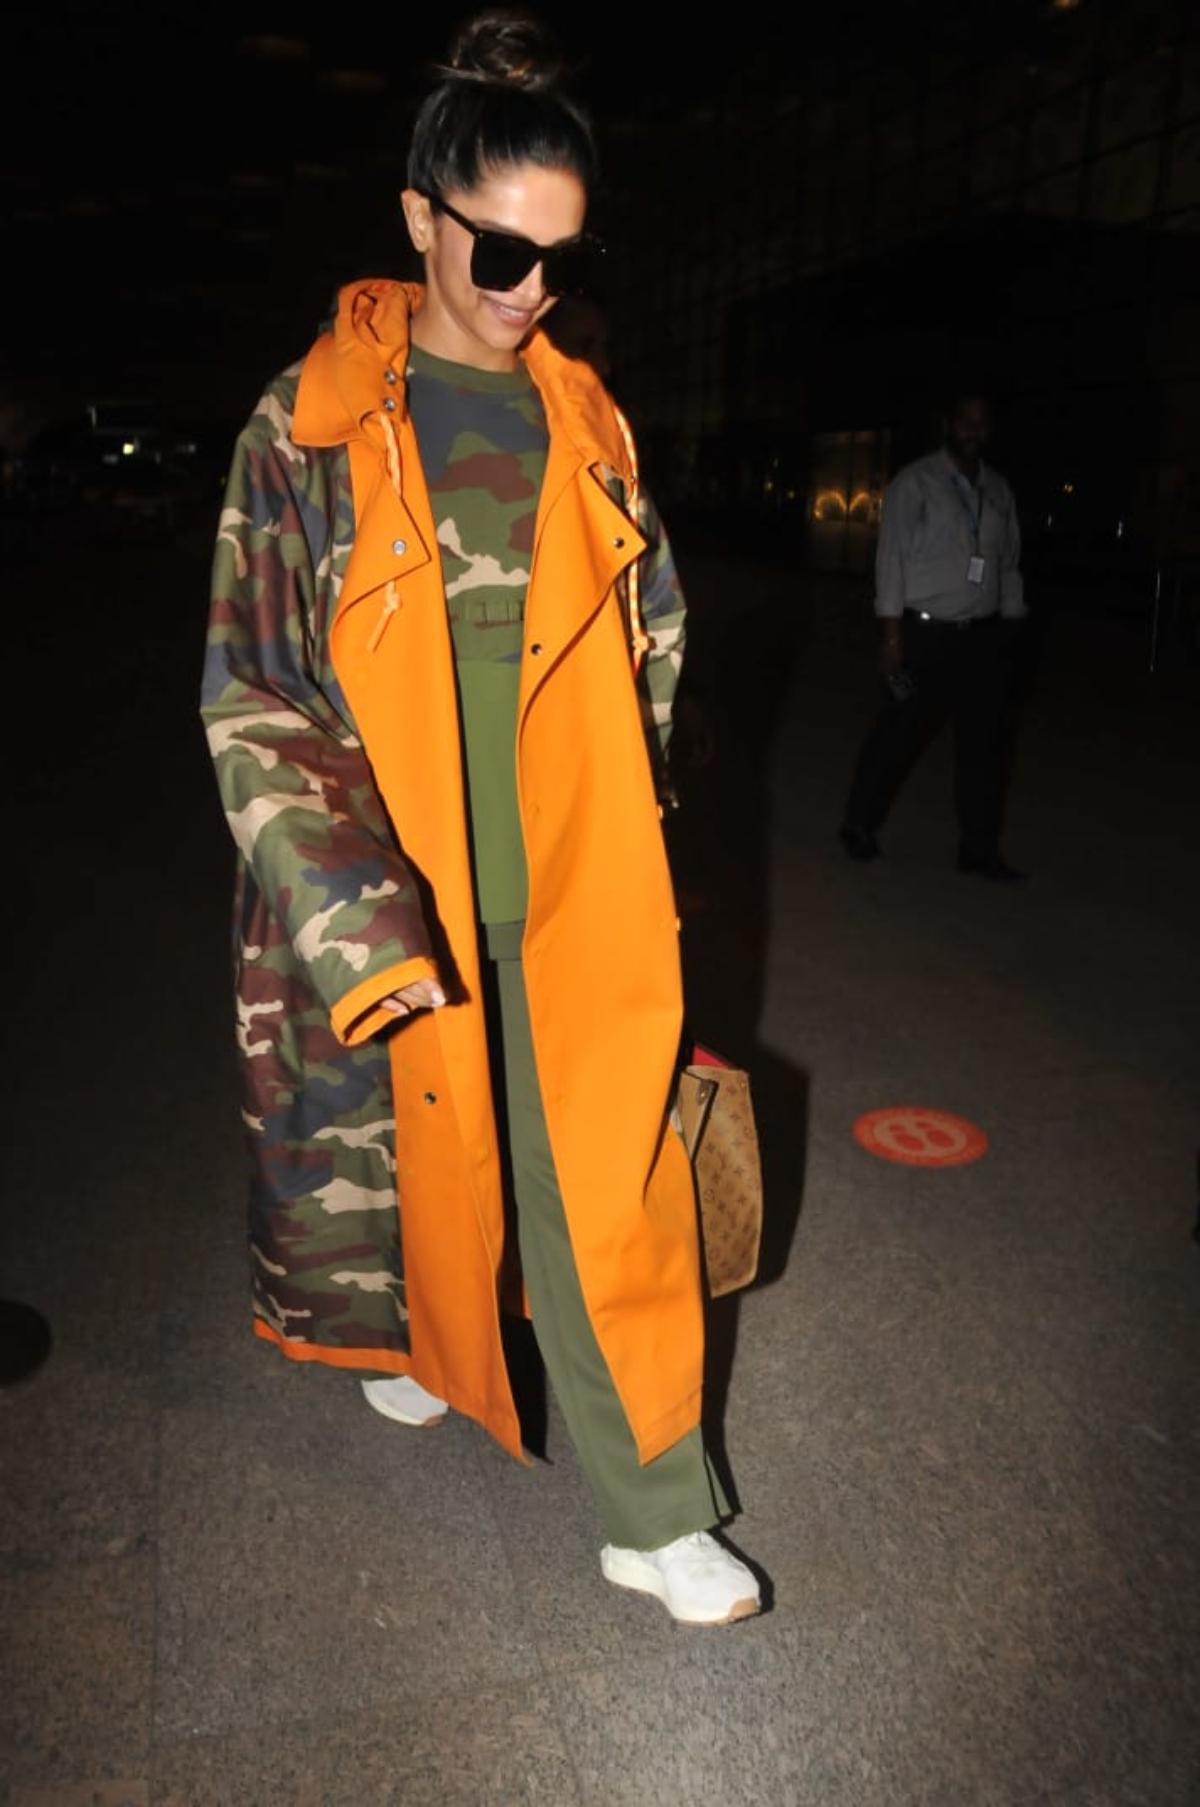 Bollywood actor Deepika Padukone got snapped in the early hours of Tuesday morning at the International Mumbai airport, made a stellar style statement as she arrived donning a chic long and oversized camo-print trench jacket. 